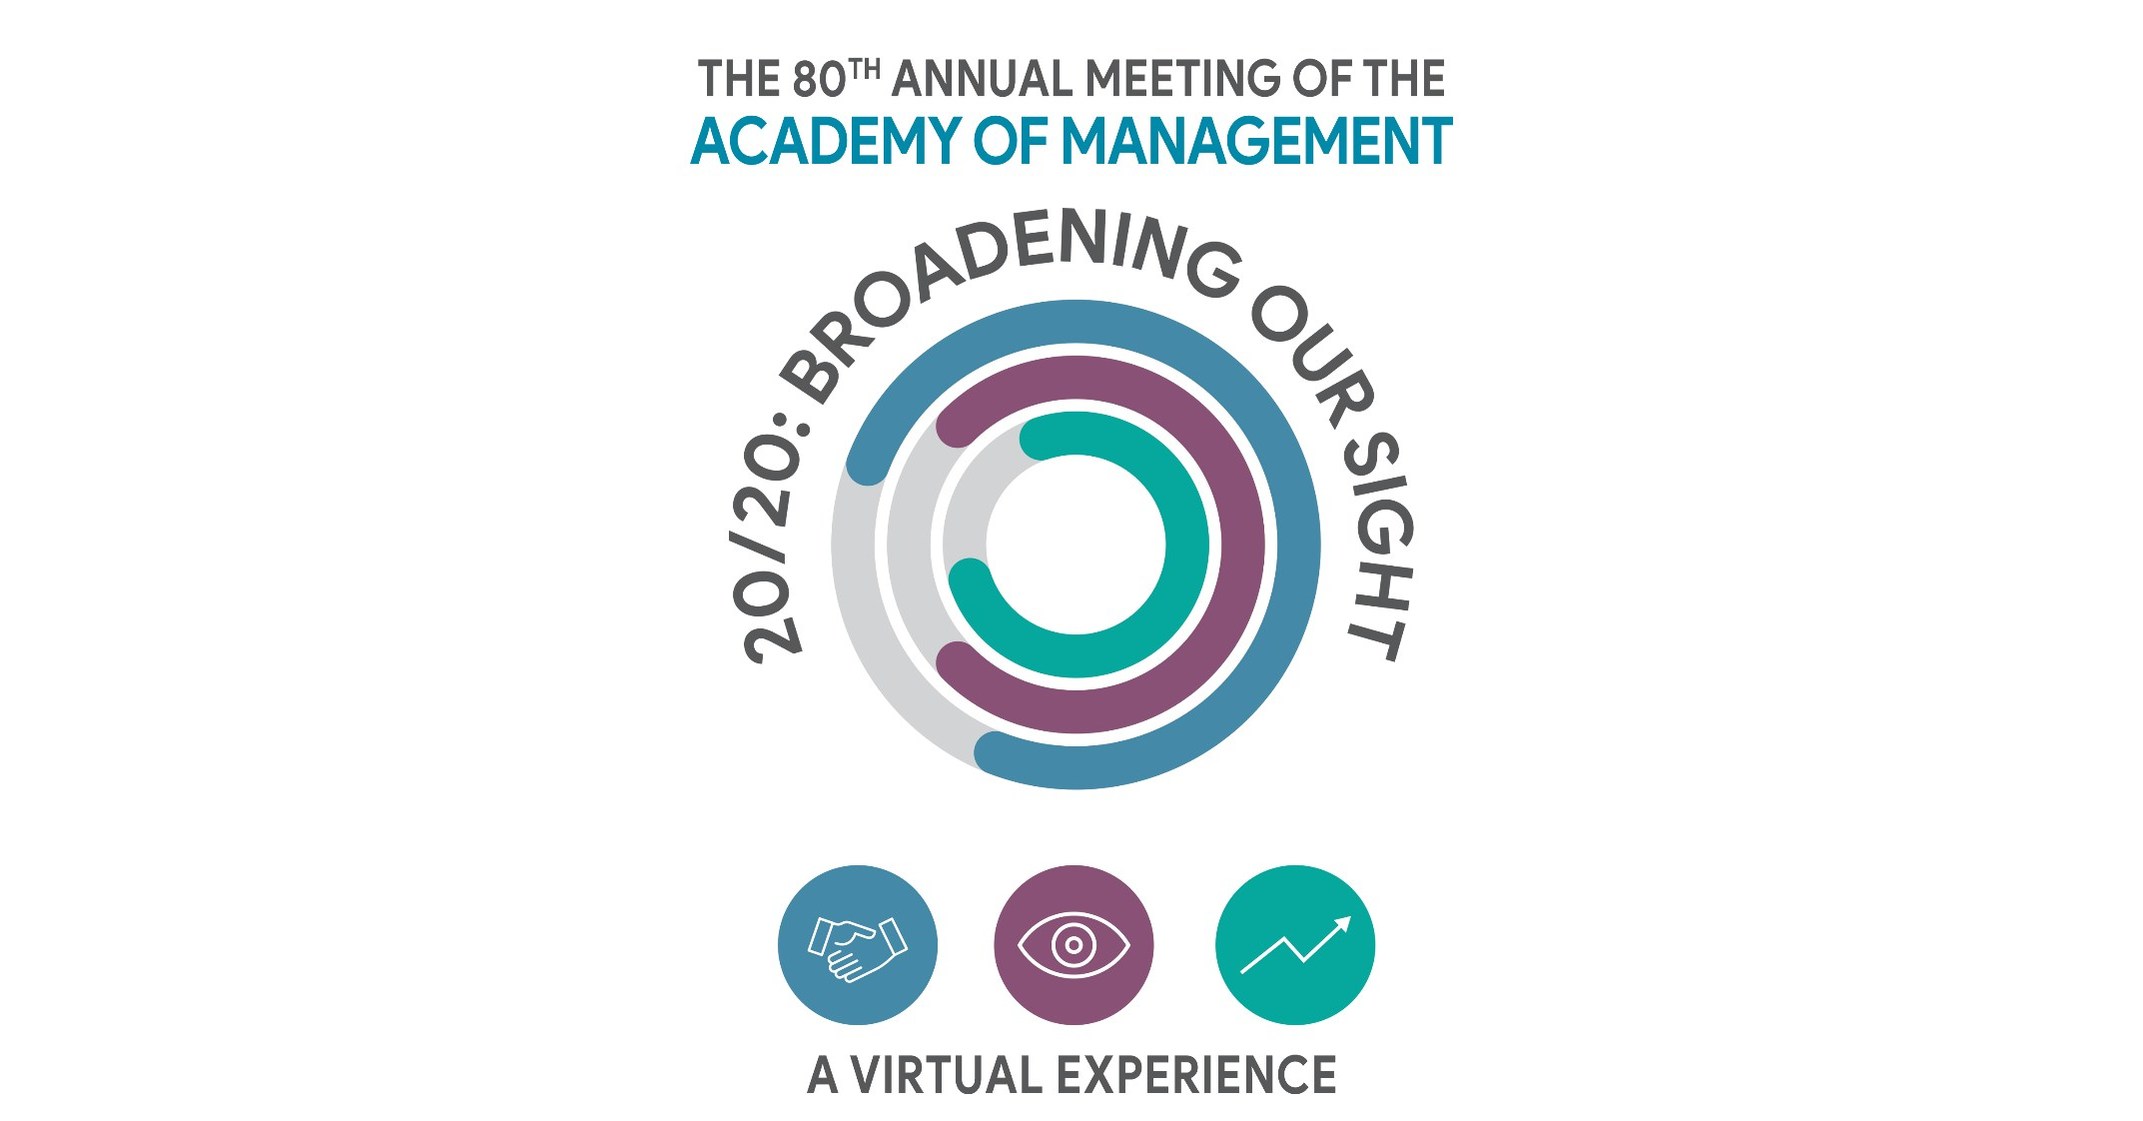 The Academy Of Management Announces its 80th Annual Meeting Exploring